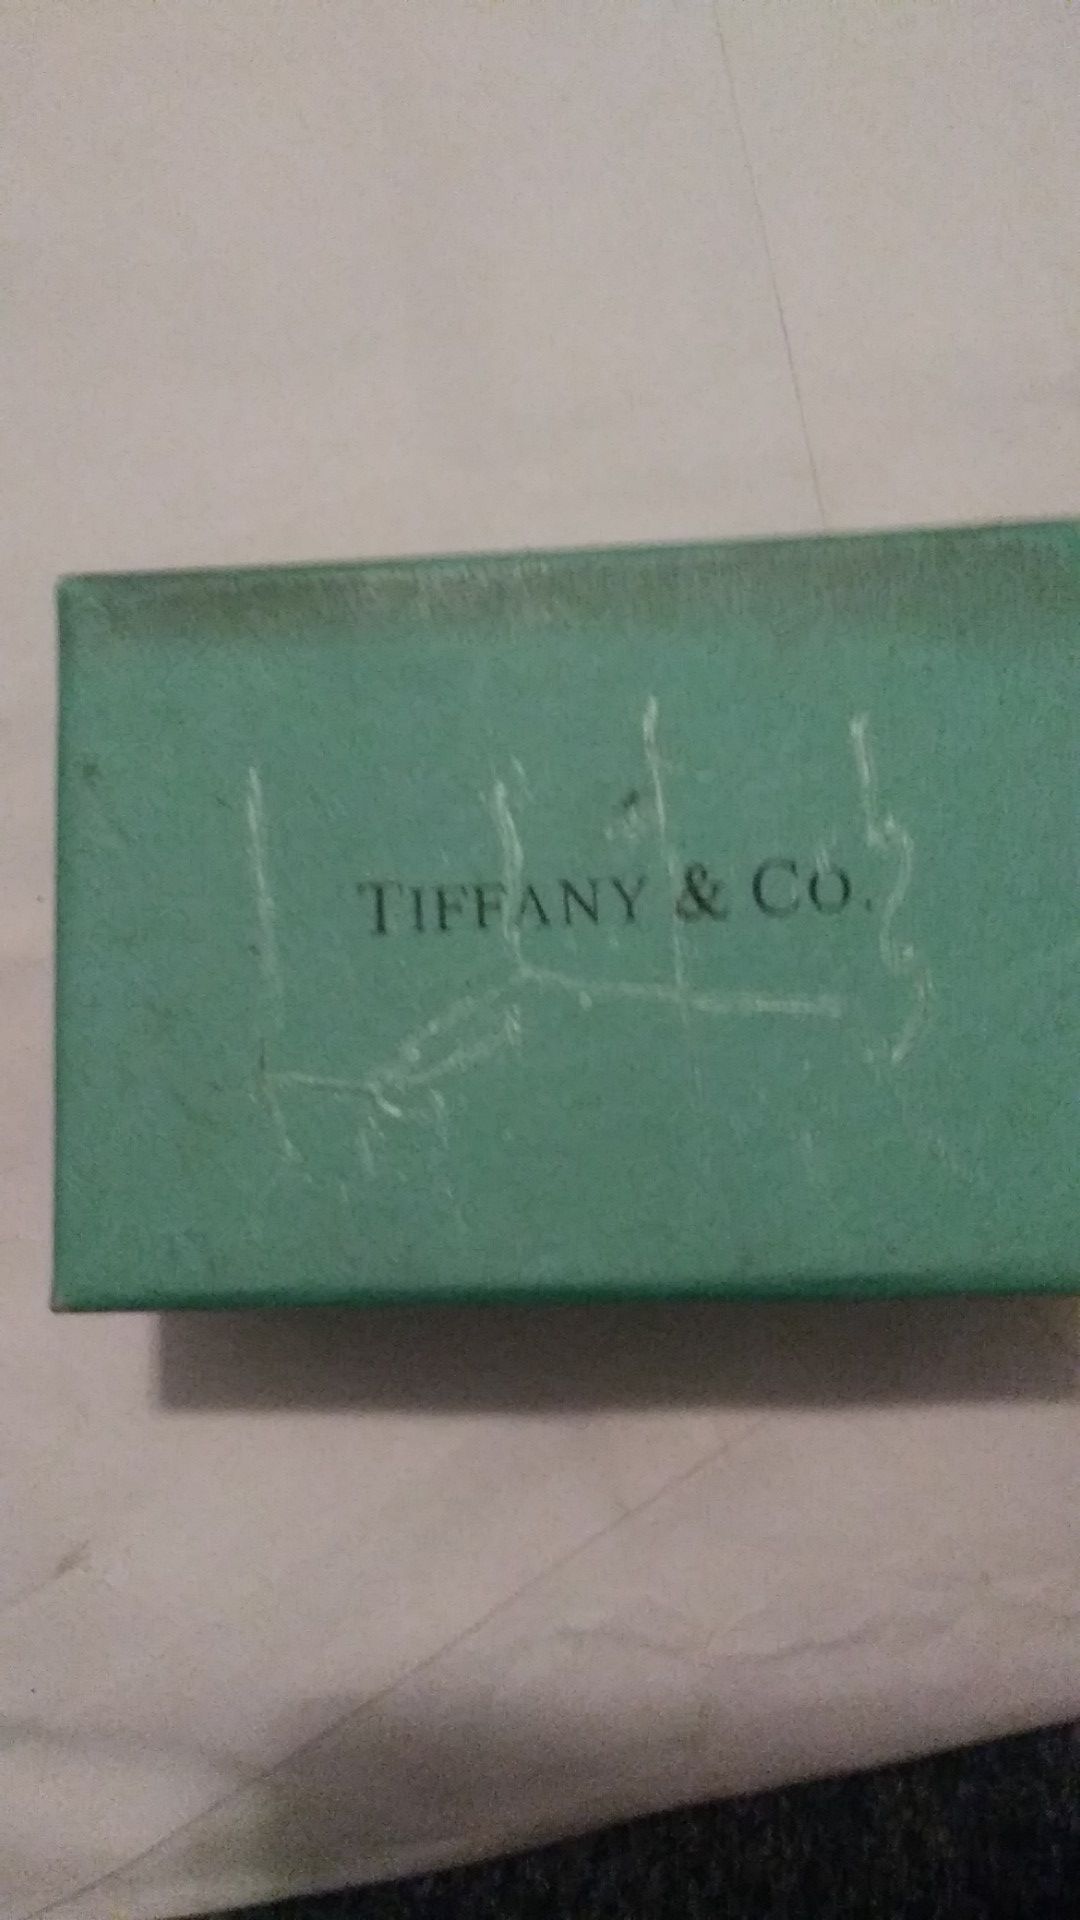 Tiffany and Co. Cuff links